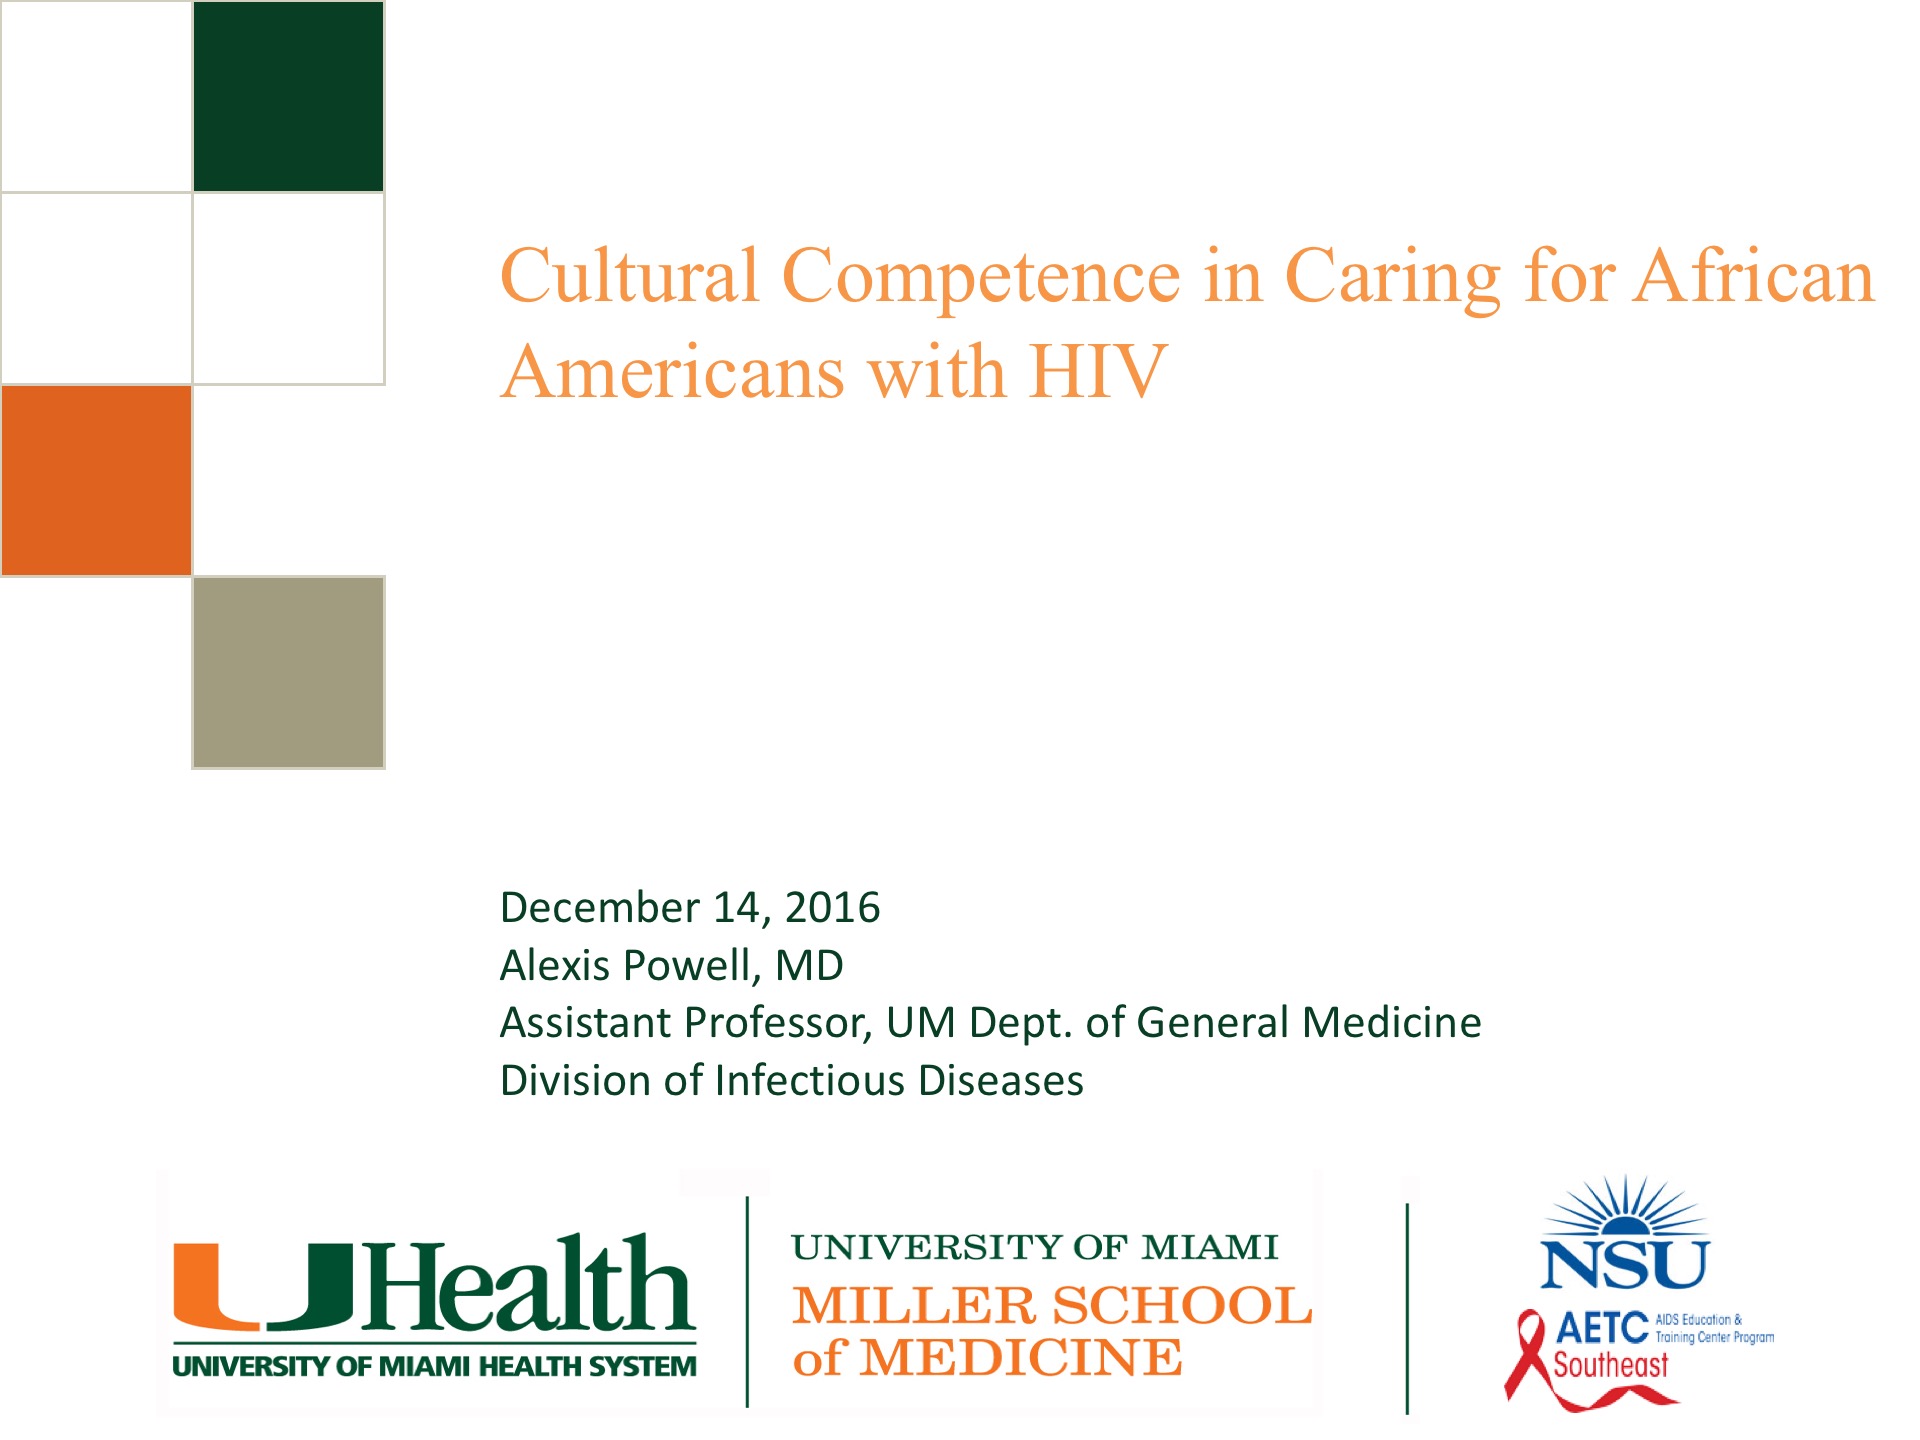 Cultural Competence in Caring for African Americans with HIV